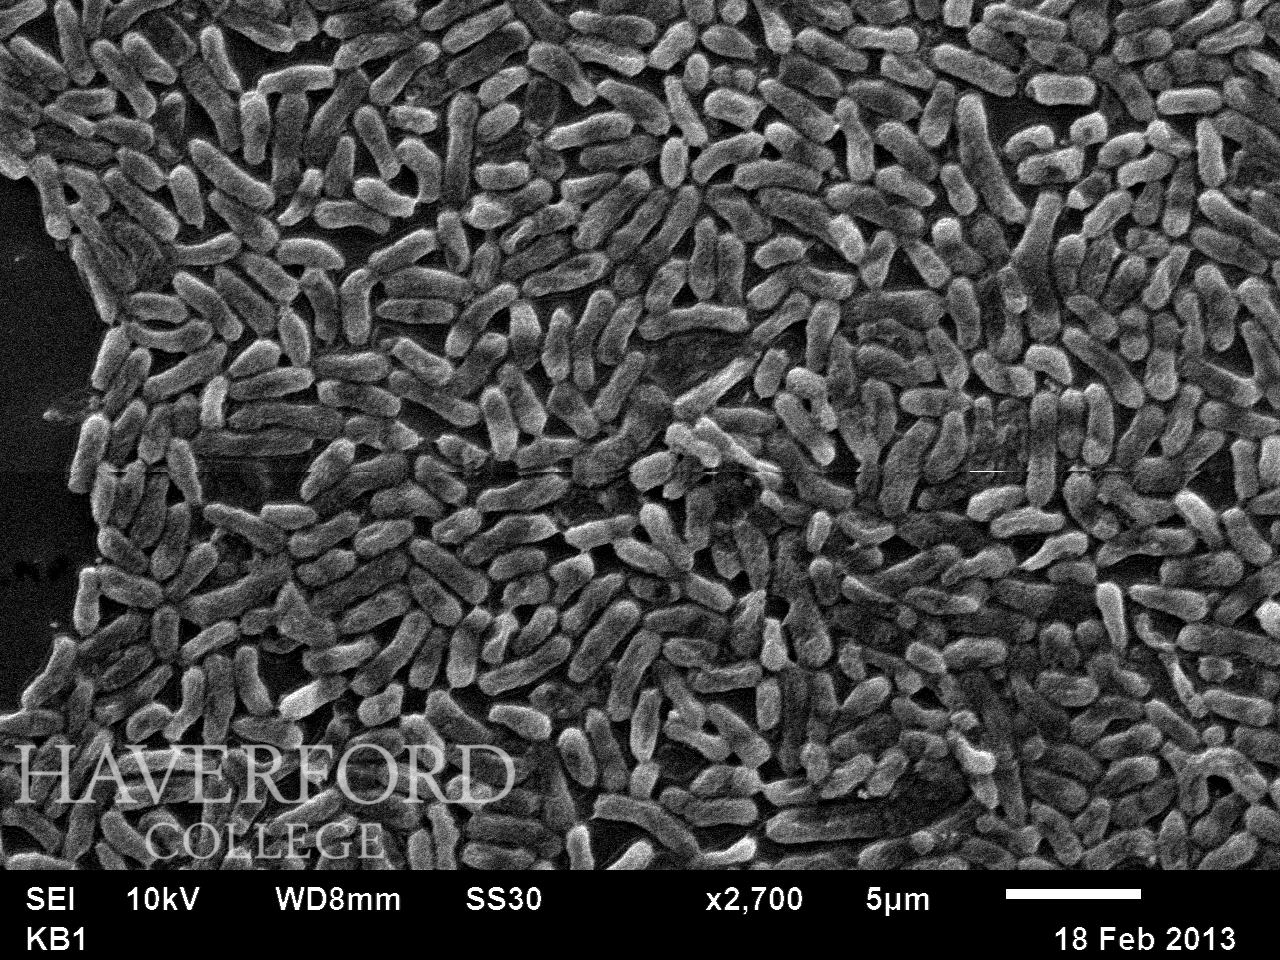 Scanning electron microscopy thesis